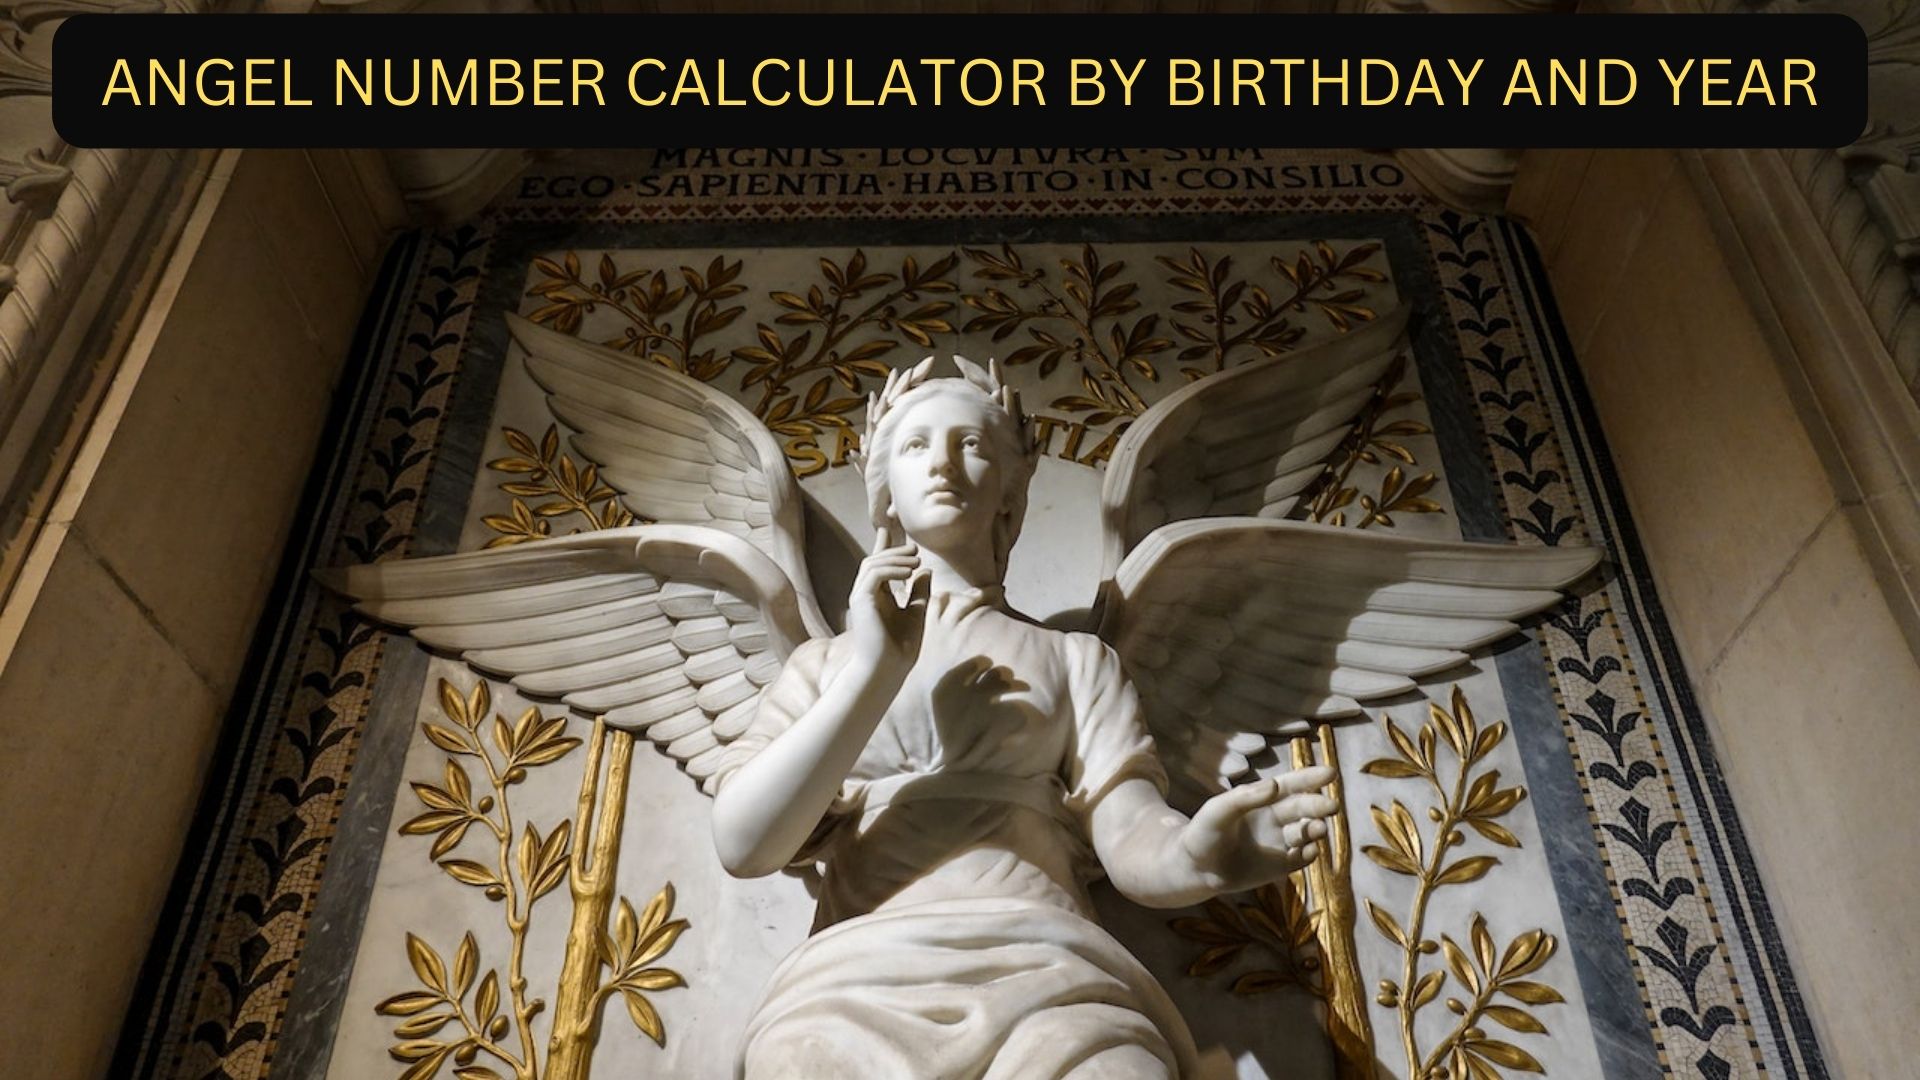 Angel Number Calculator By Birthday And Year